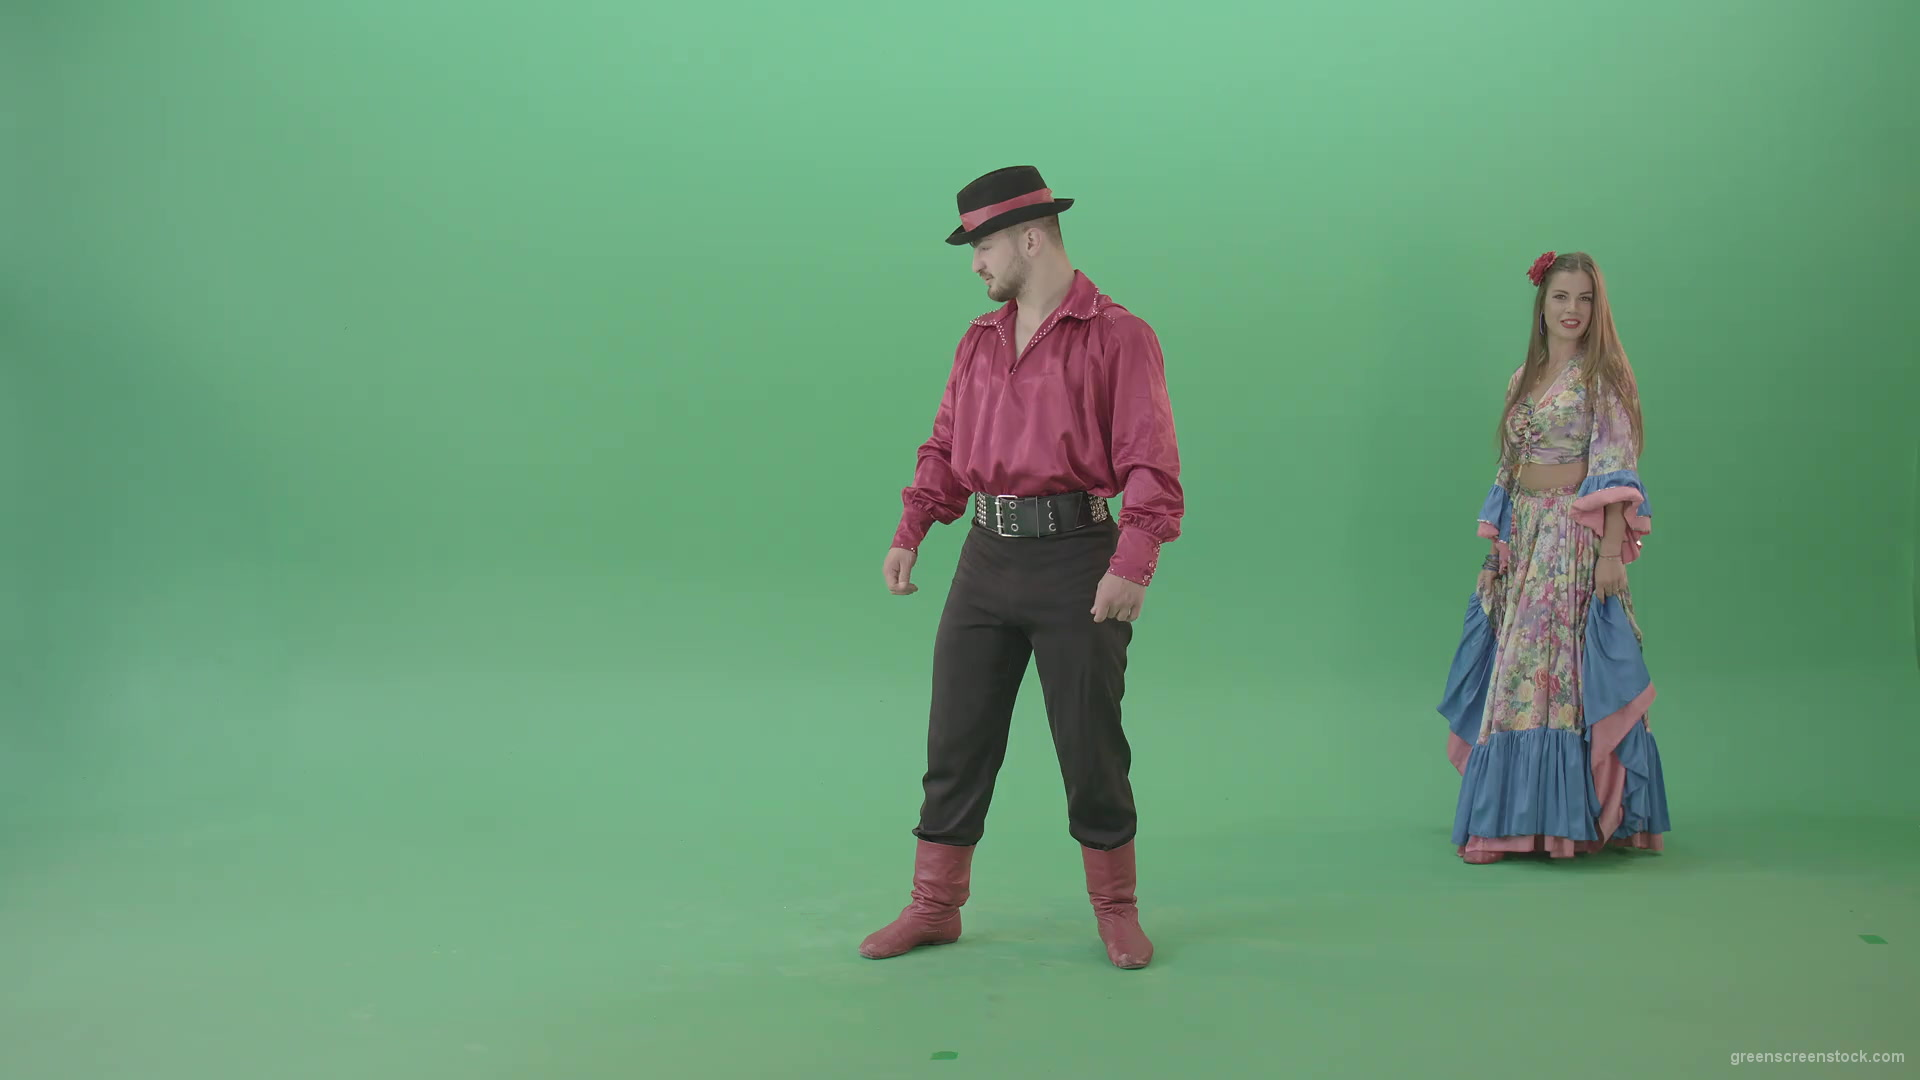 Gypsy-man-and-woman-spinning-dancing-over-green-screen-4K-video-footage-1920_001 Green Screen Stock